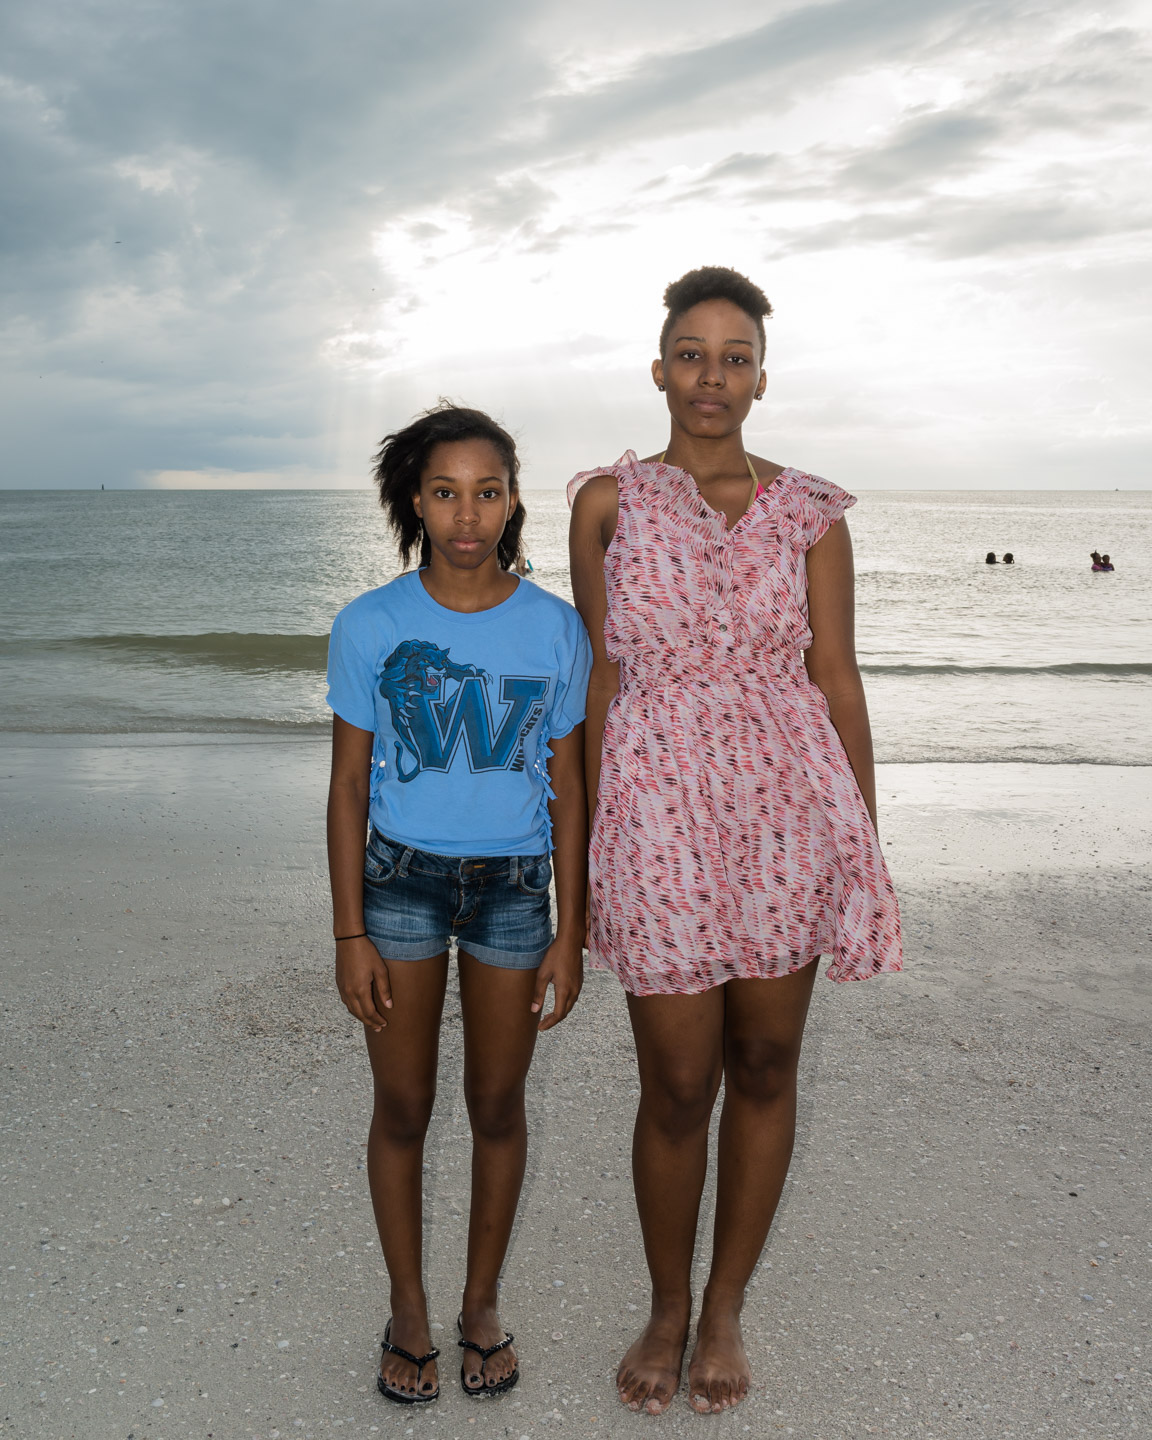  Brianna and Jessica, Clearwater Beach 